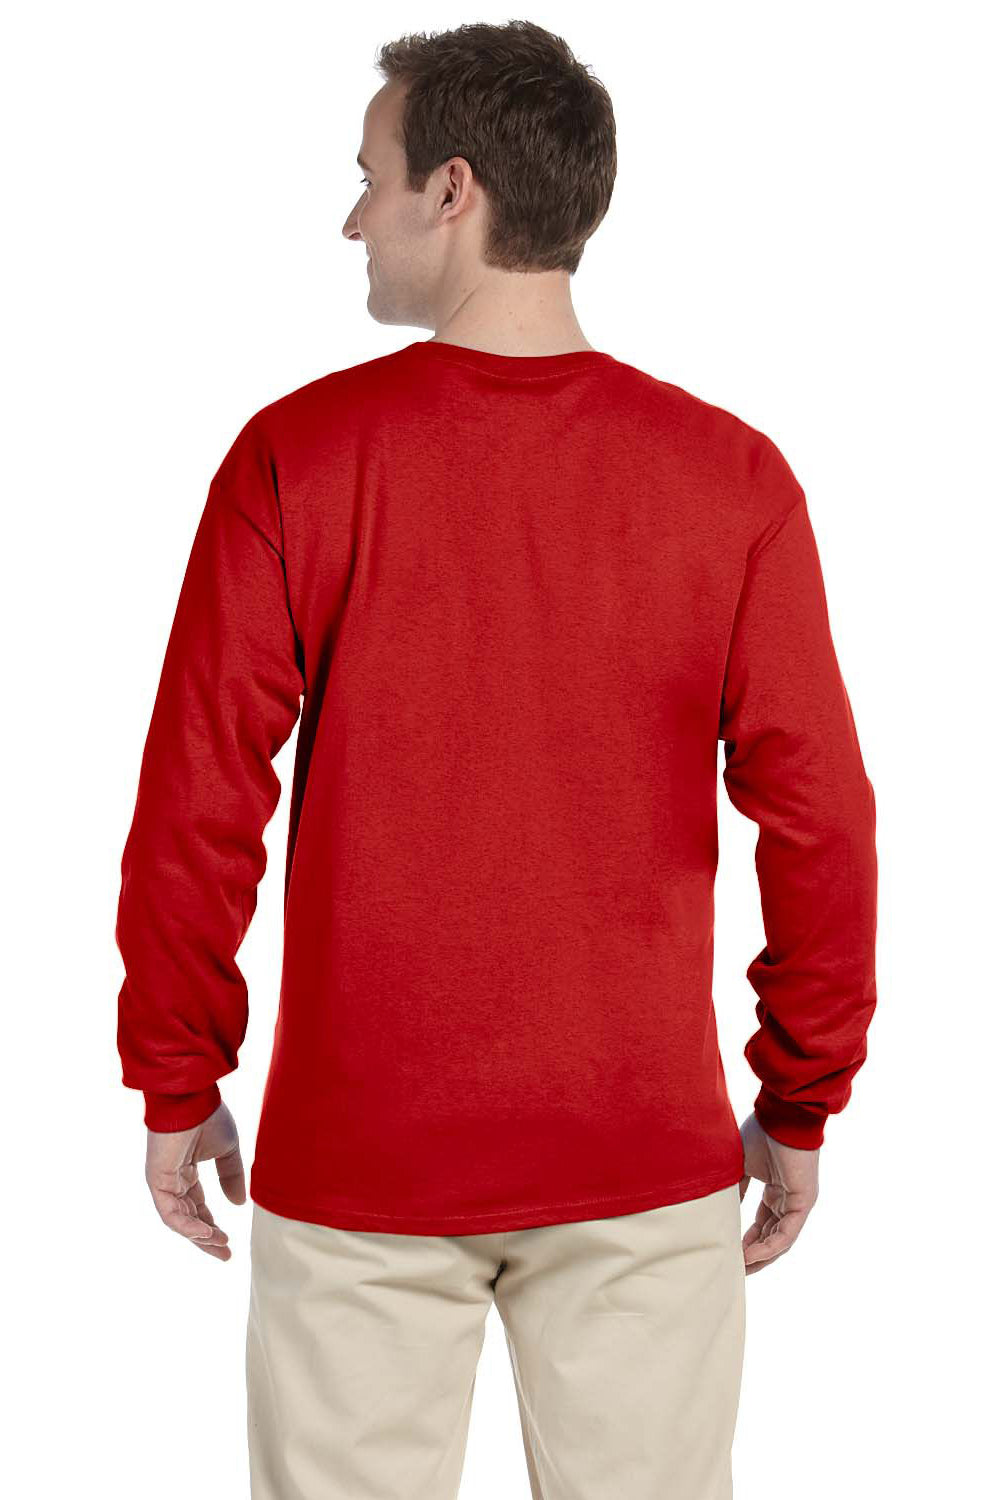 Fruit Of The Loom 4930 Mens HD Jersey Long Sleeve Crewneck T-Shirt Red Back